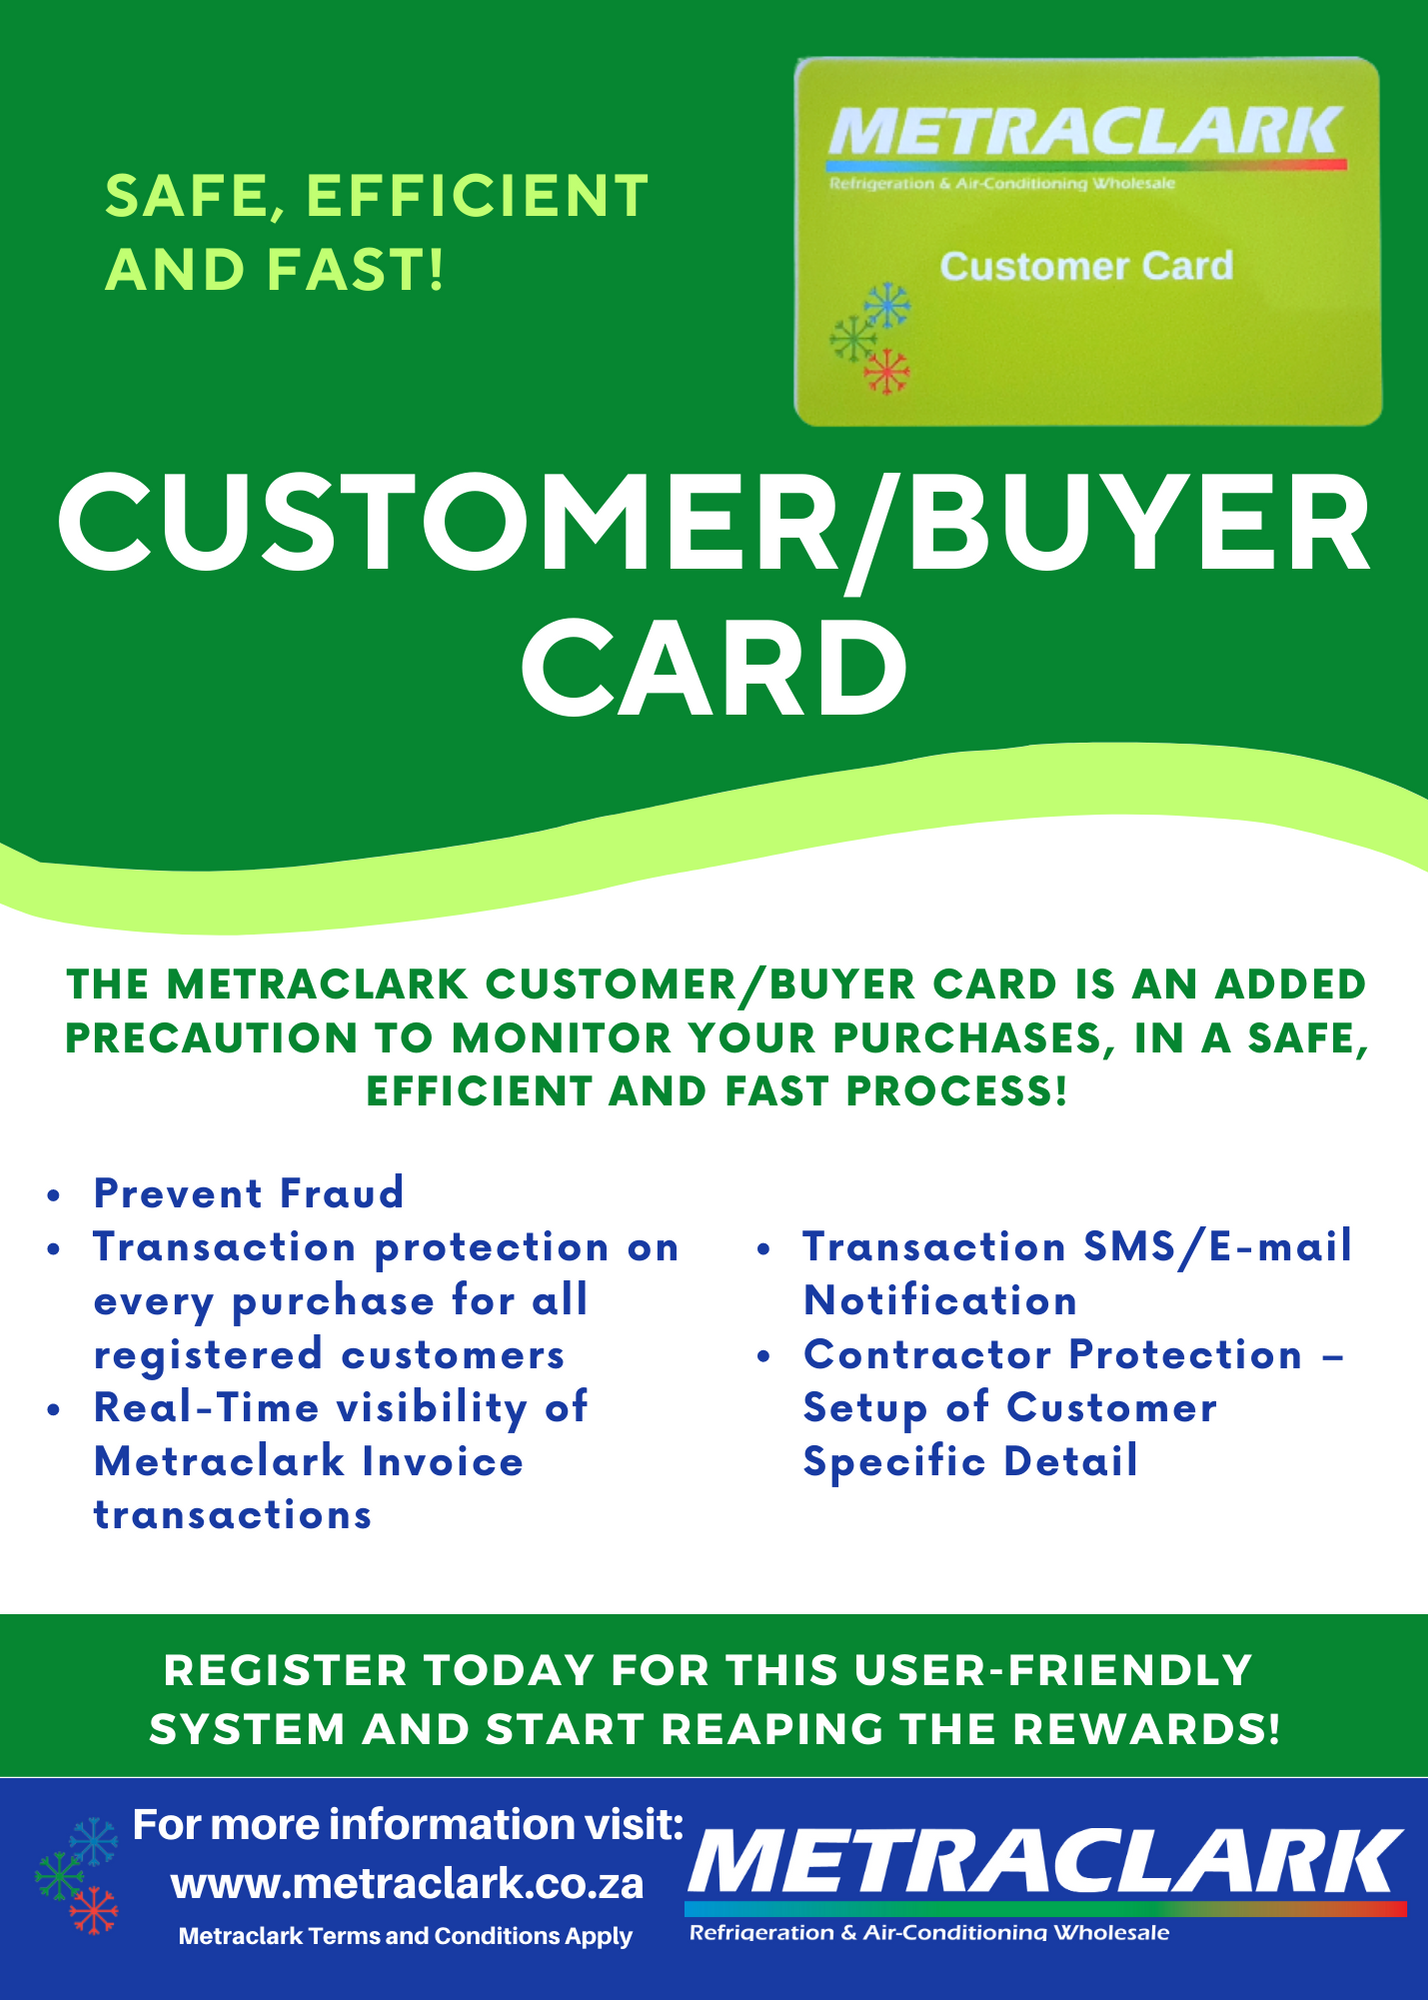 Safe, Efficient and Fast-Get the Metraclark Customer/Buyer Card!